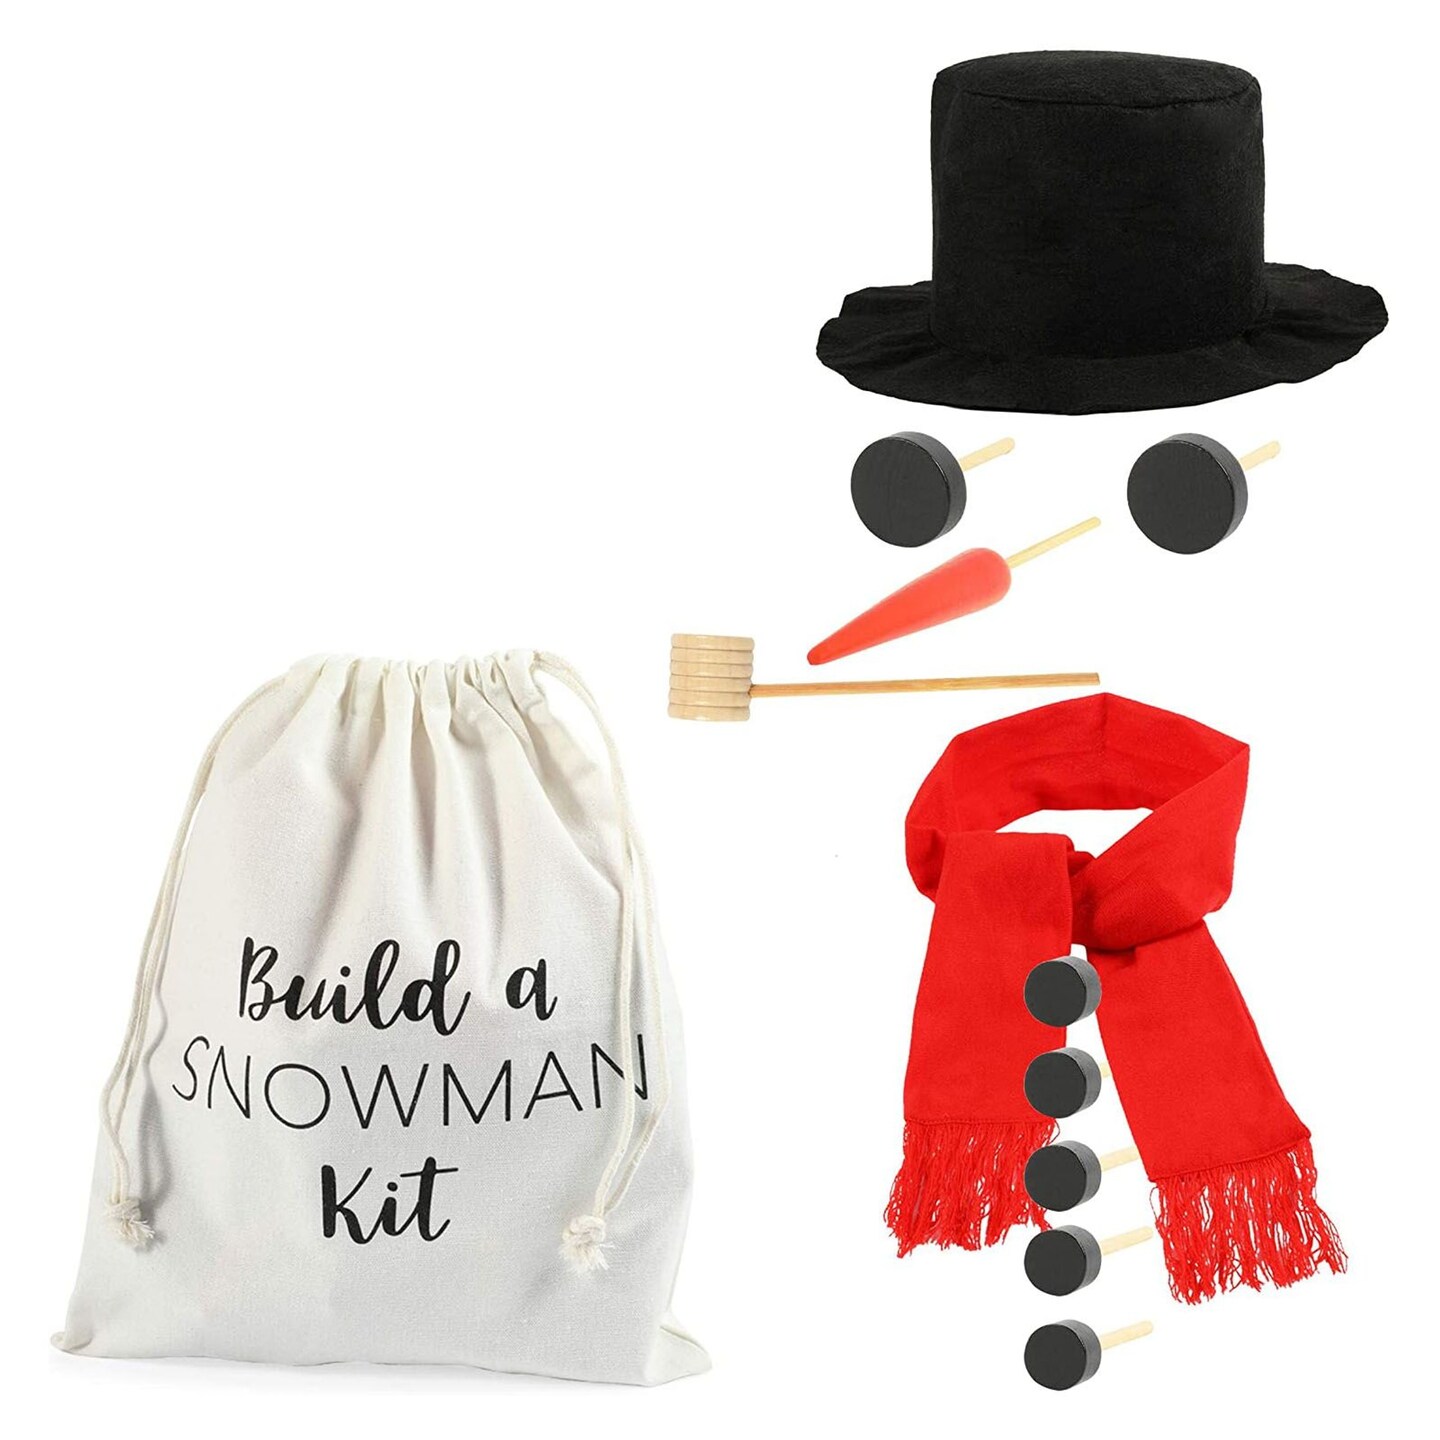 Snowman Kit Just Add Snow Family Gift Snow Day DIY Christmas